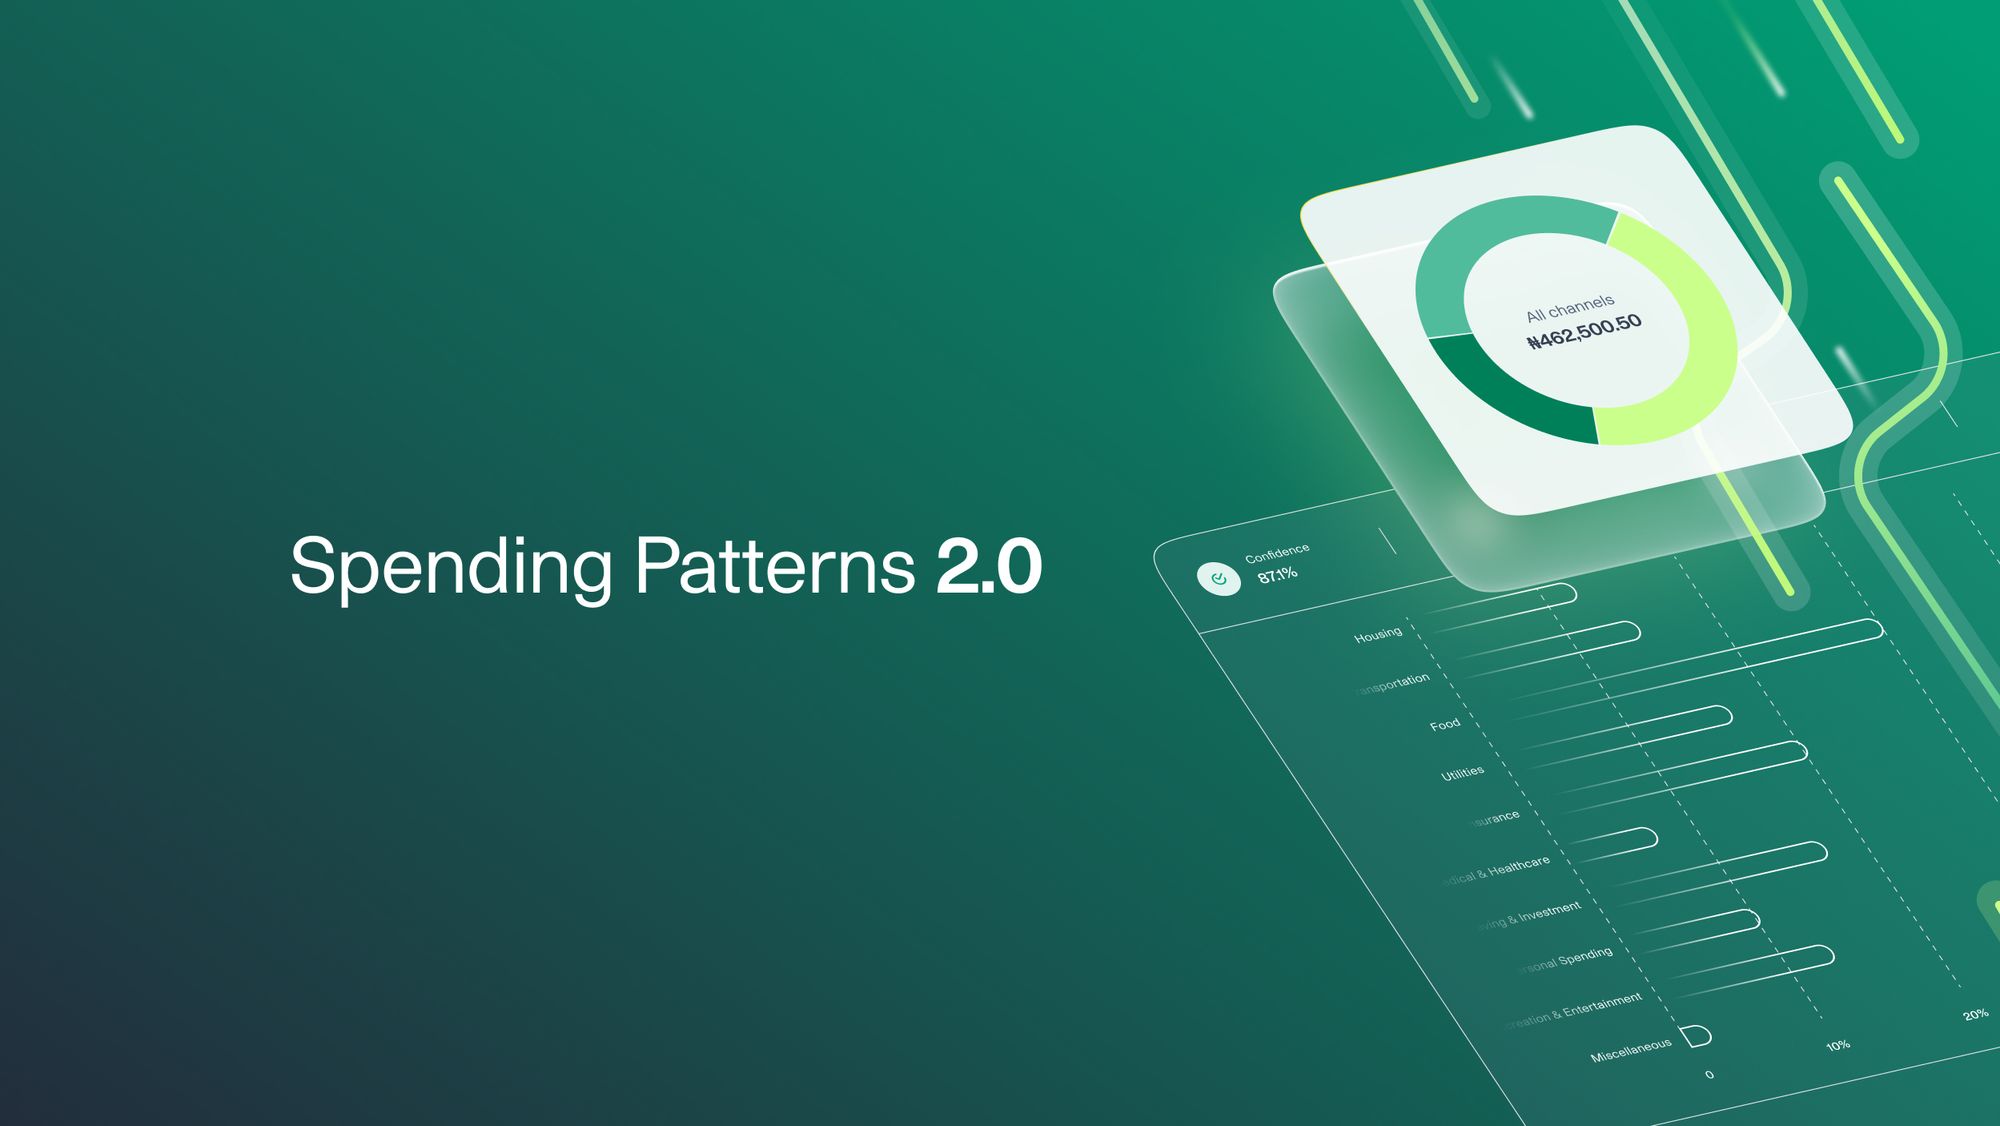 Getting Started with Spending Patterns 2.0